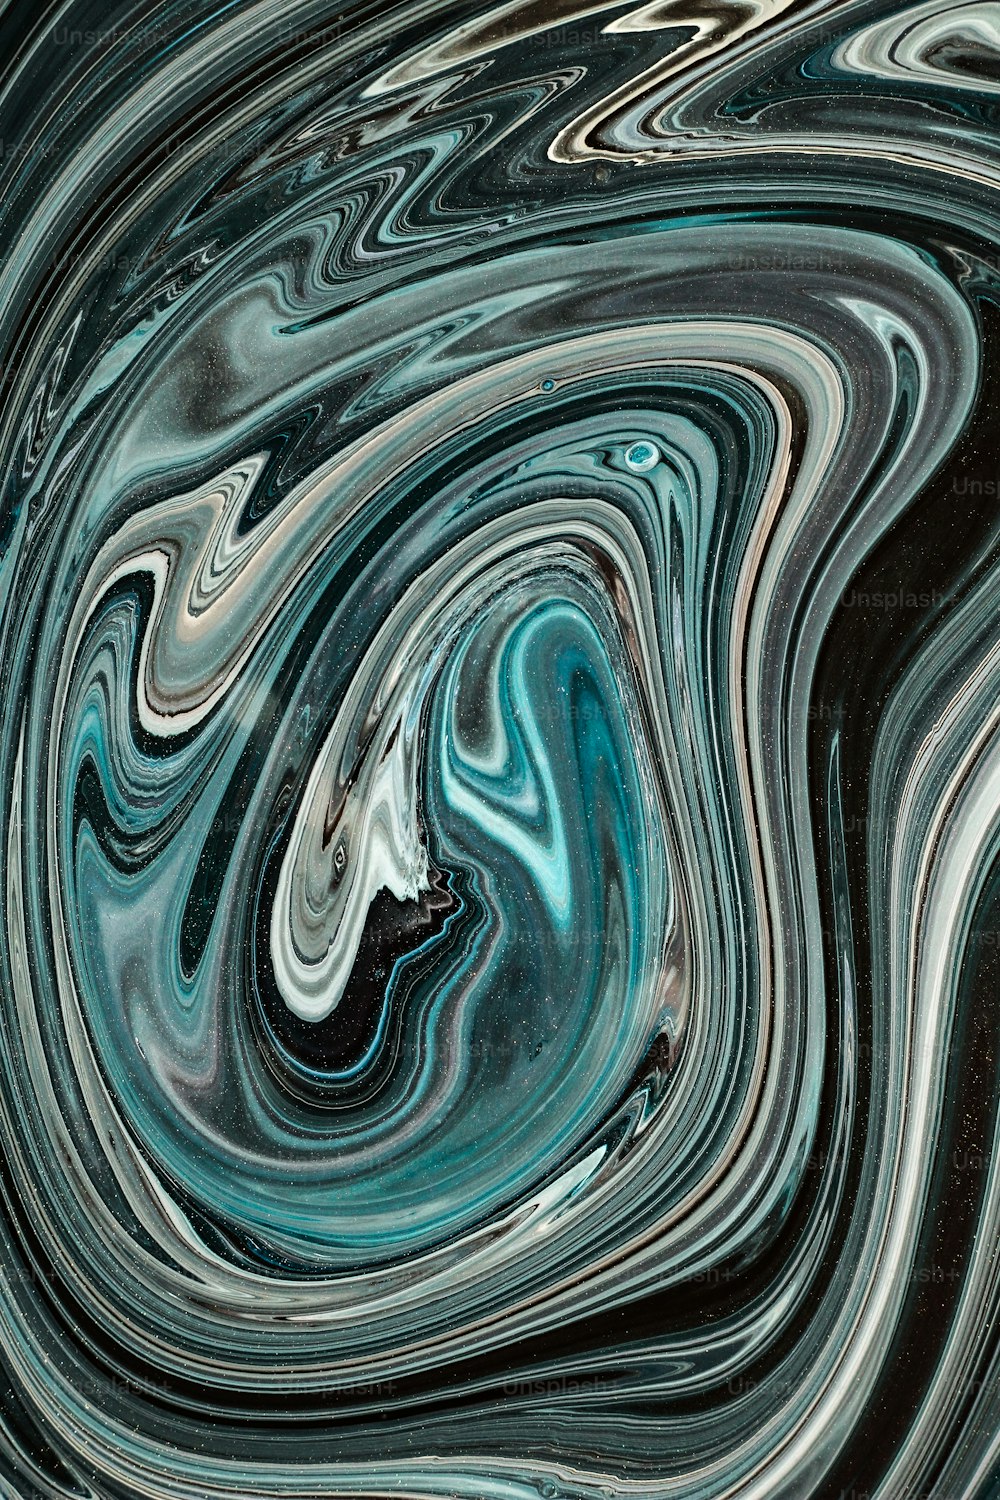 a black and white swirl with a blue center